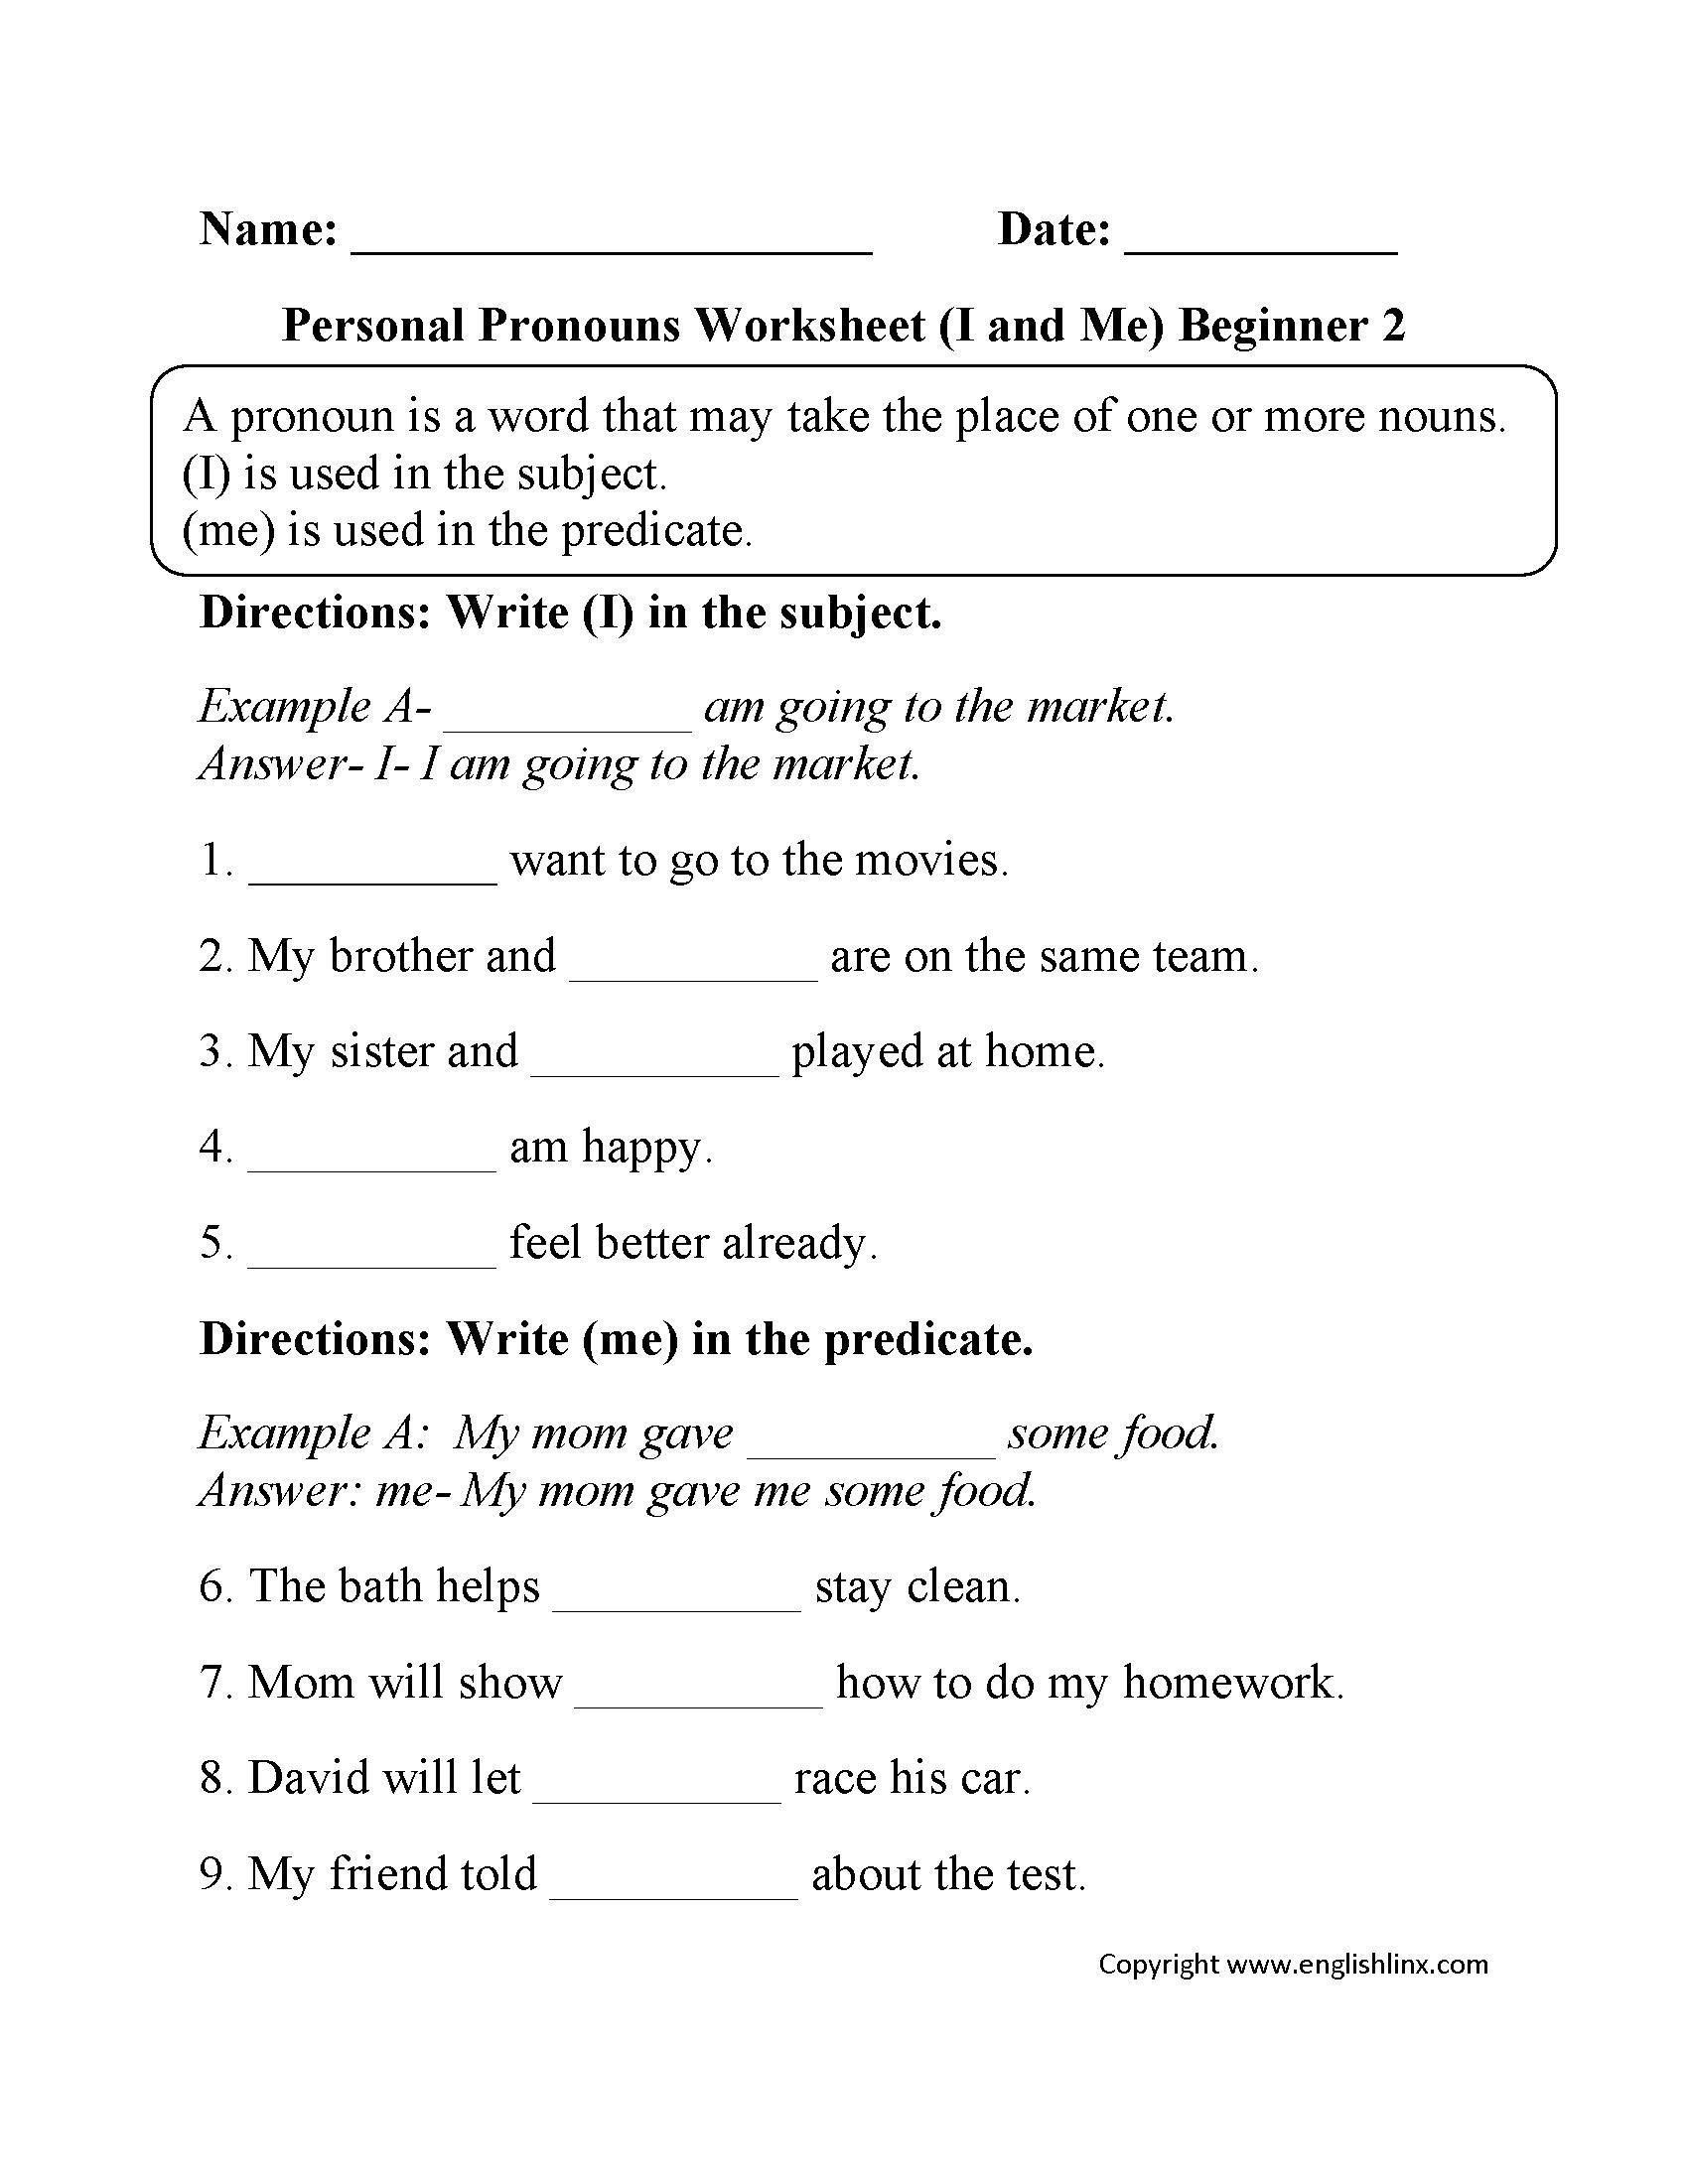 hayes-school-publishing-spanish-worksheets-answers-db-excel